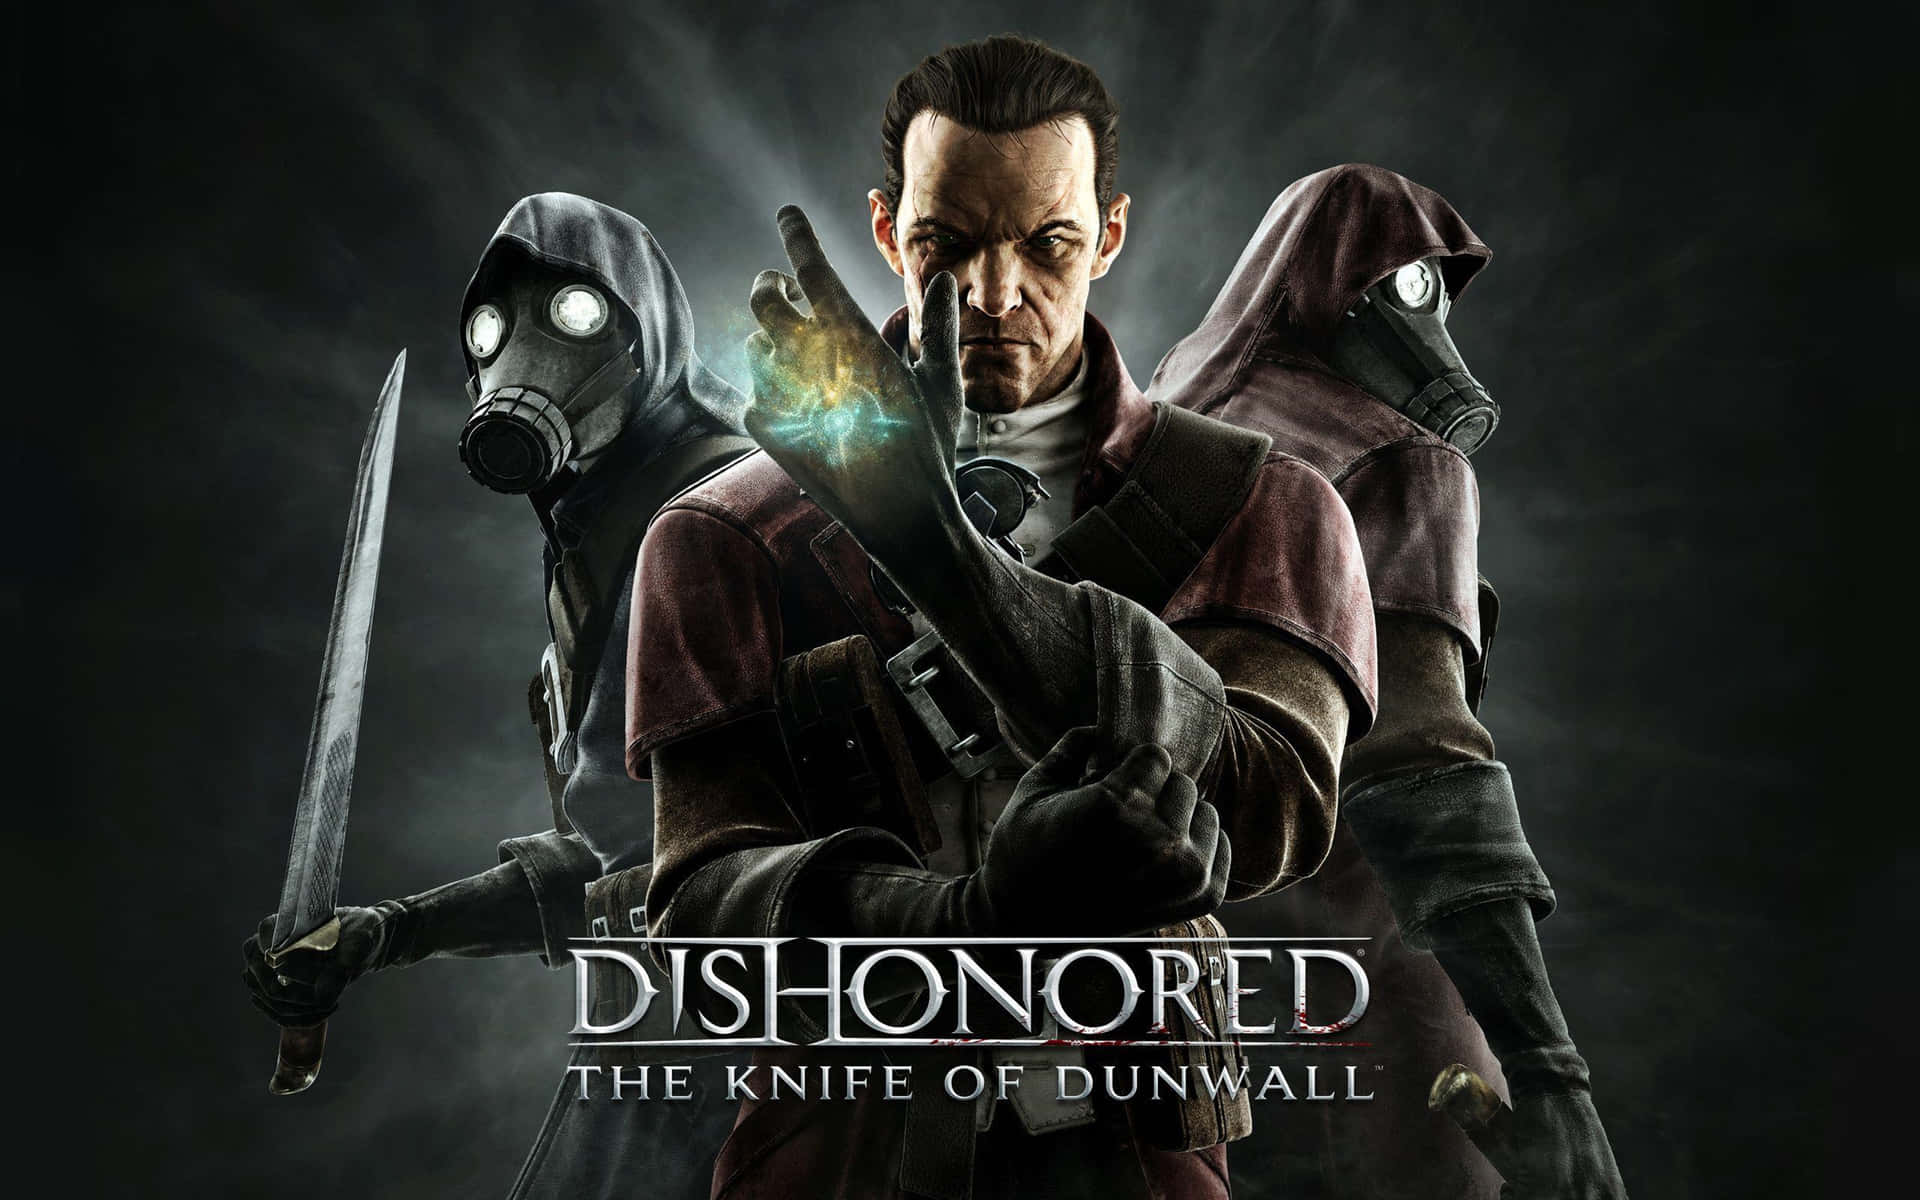 Free 4k Dishonored Wallpaper Downloads, [100+] 4k Dishonored Wallpapers for  FREE 